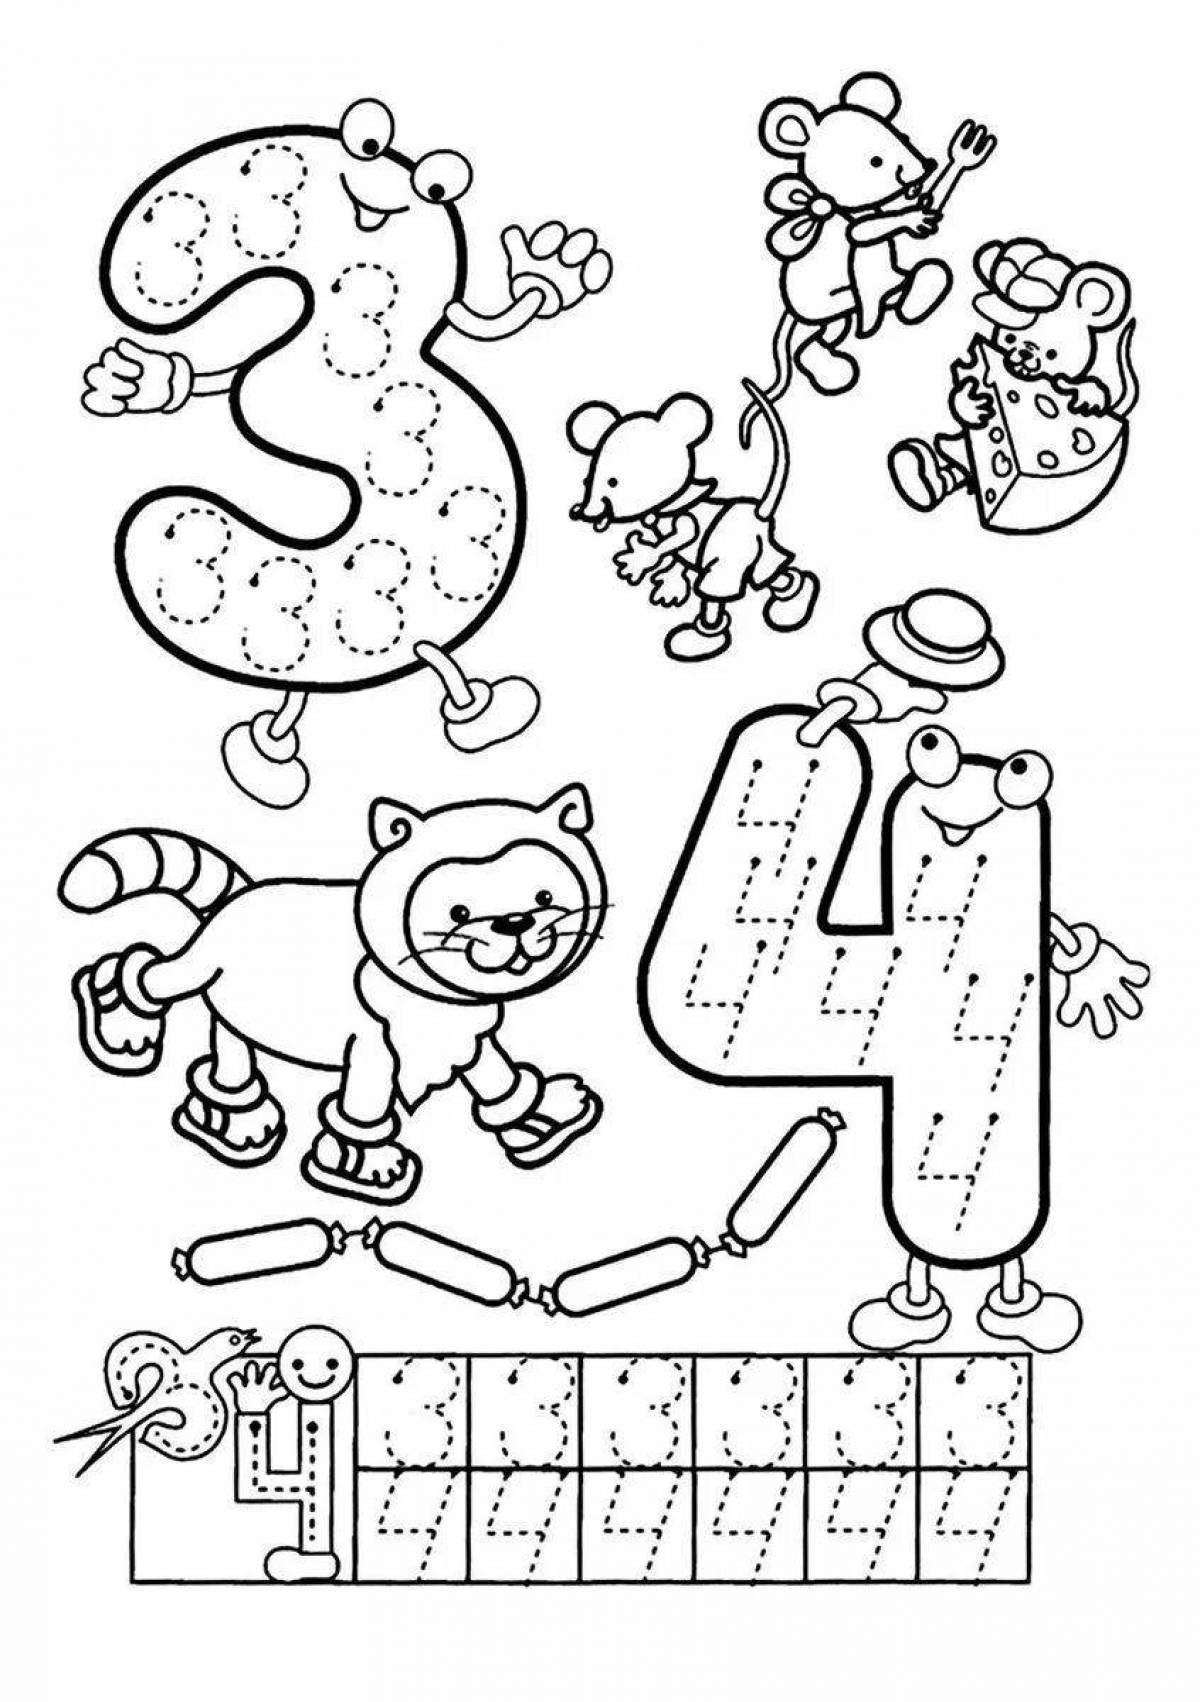 Colorful coloring book with letters and numbers for preschoolers